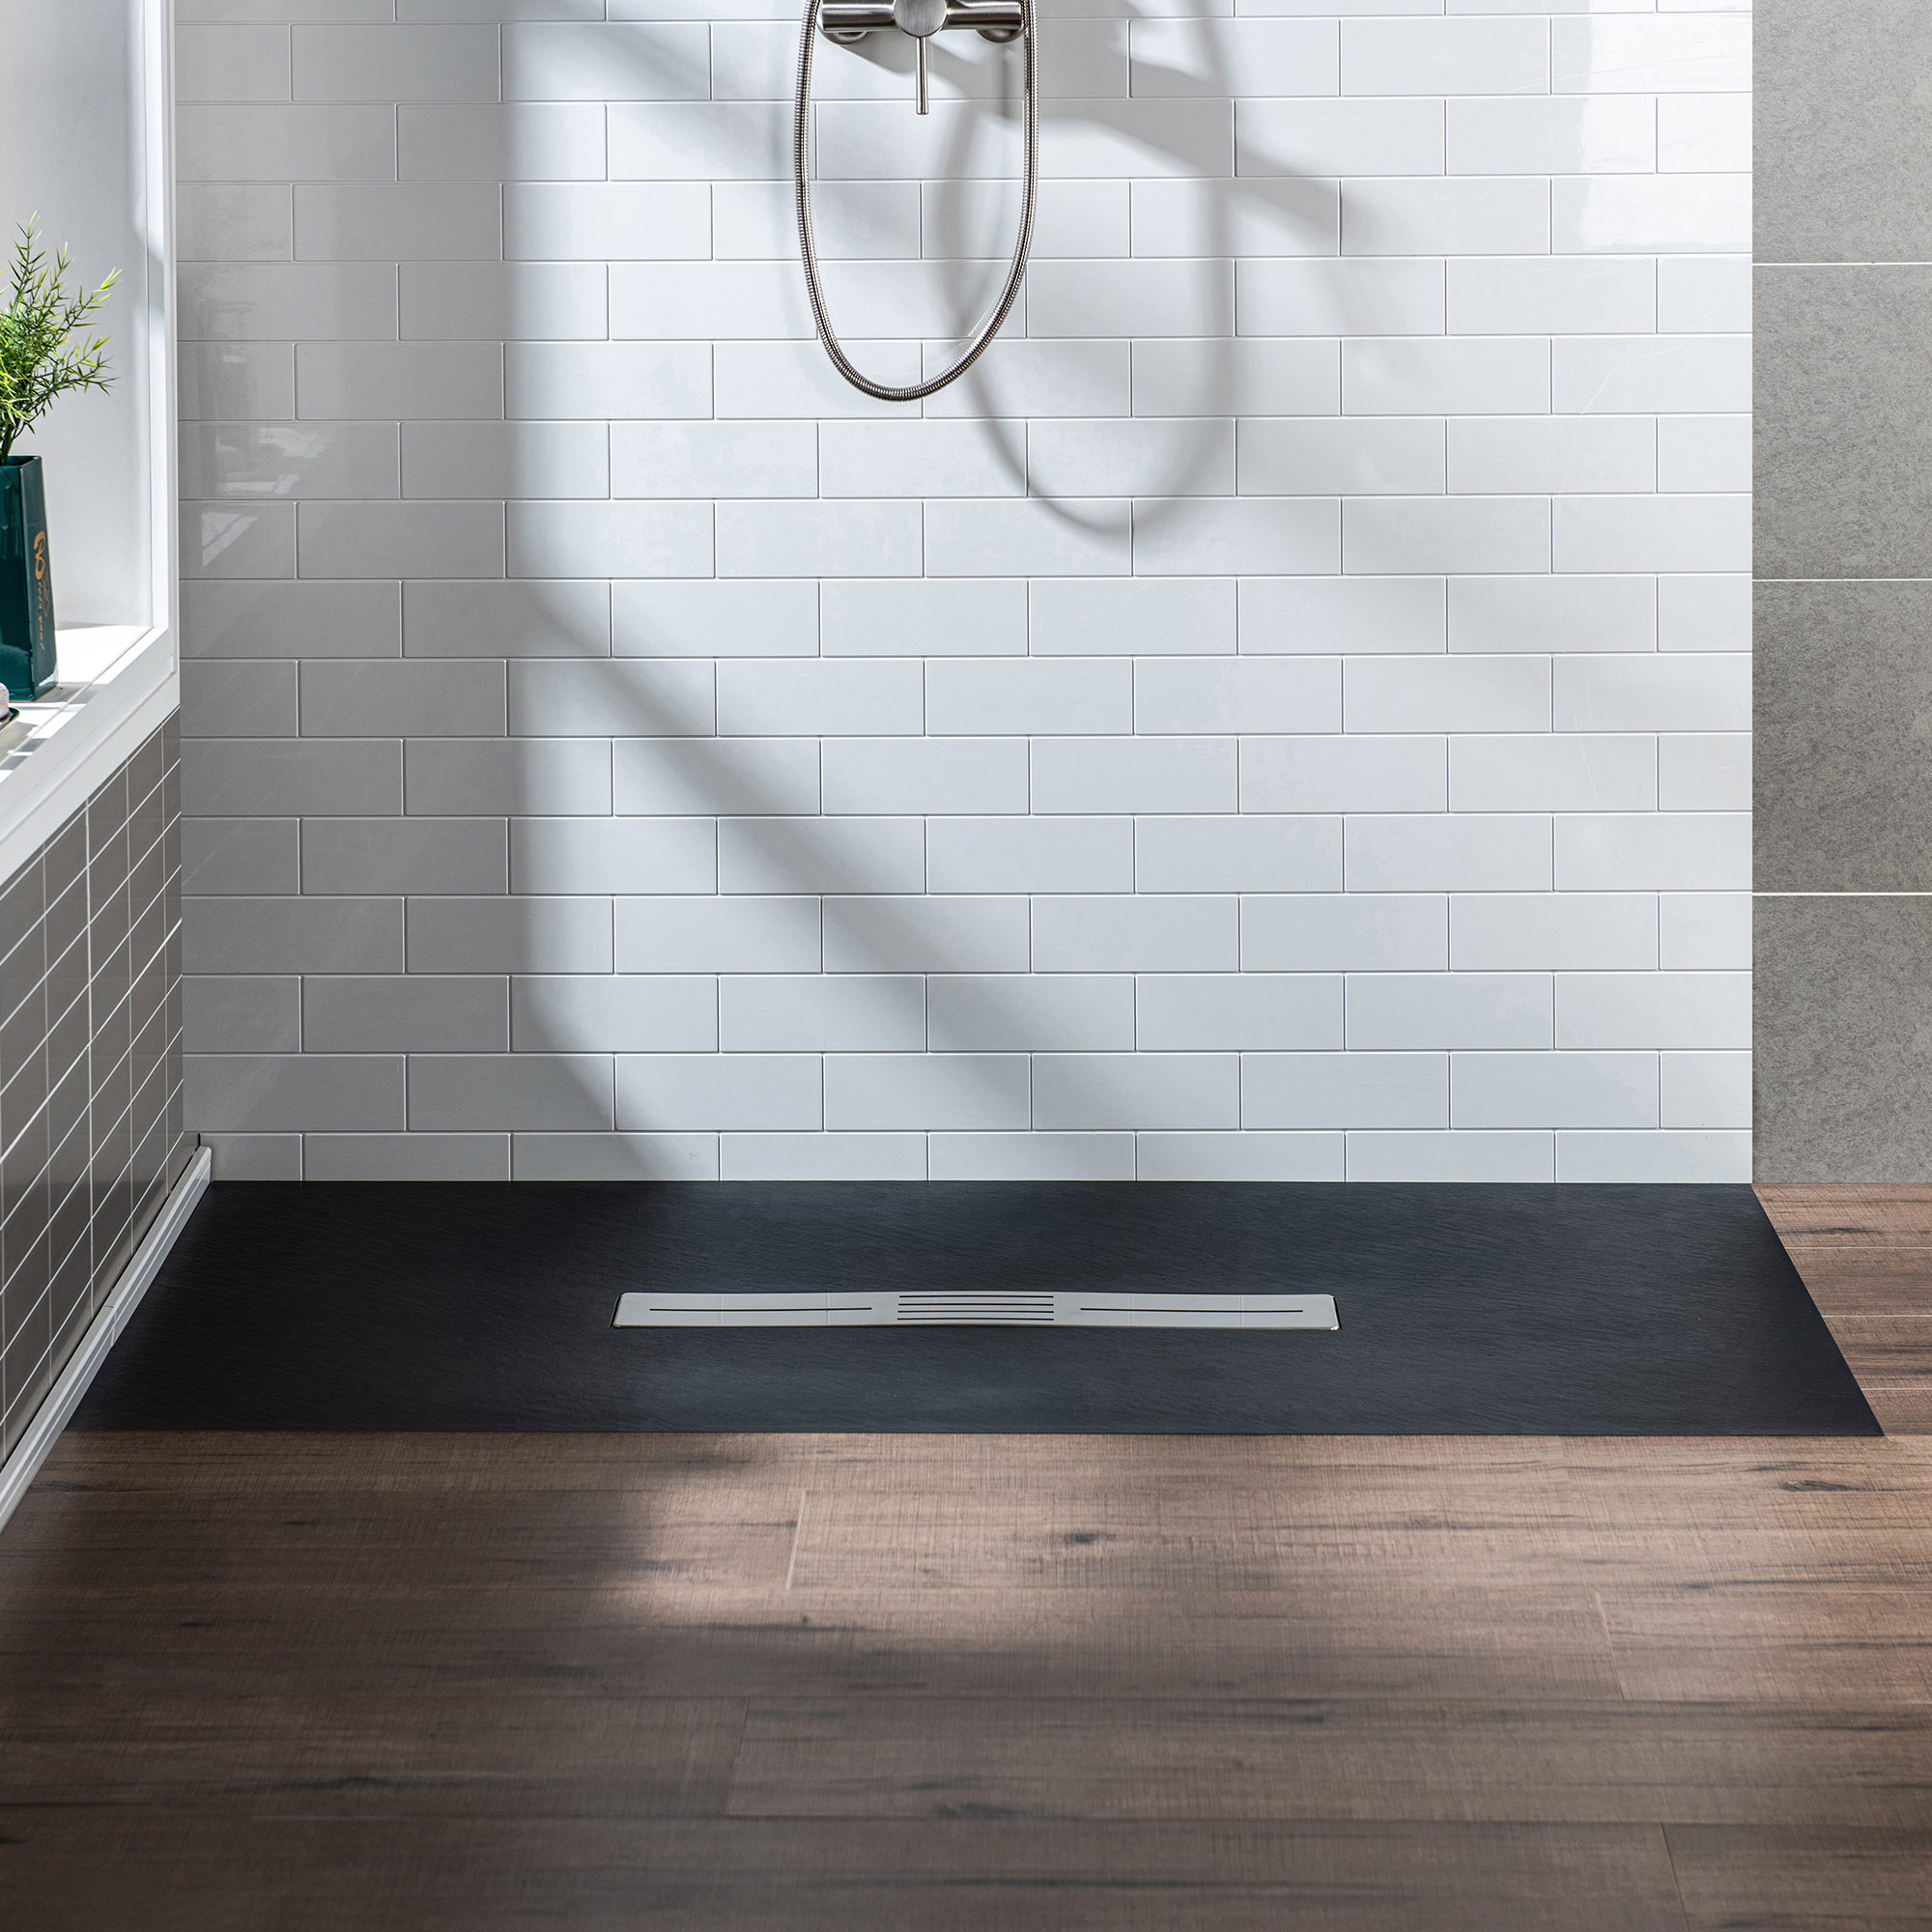  WOODBRIDGE 60-in L x 32-in W Zero Threshold End Drain Shower Base with Center Drain Placement, Matching Decorative Drain Plate and Tile Flange, Wheel Chair Access, Low Profile, Black_12514